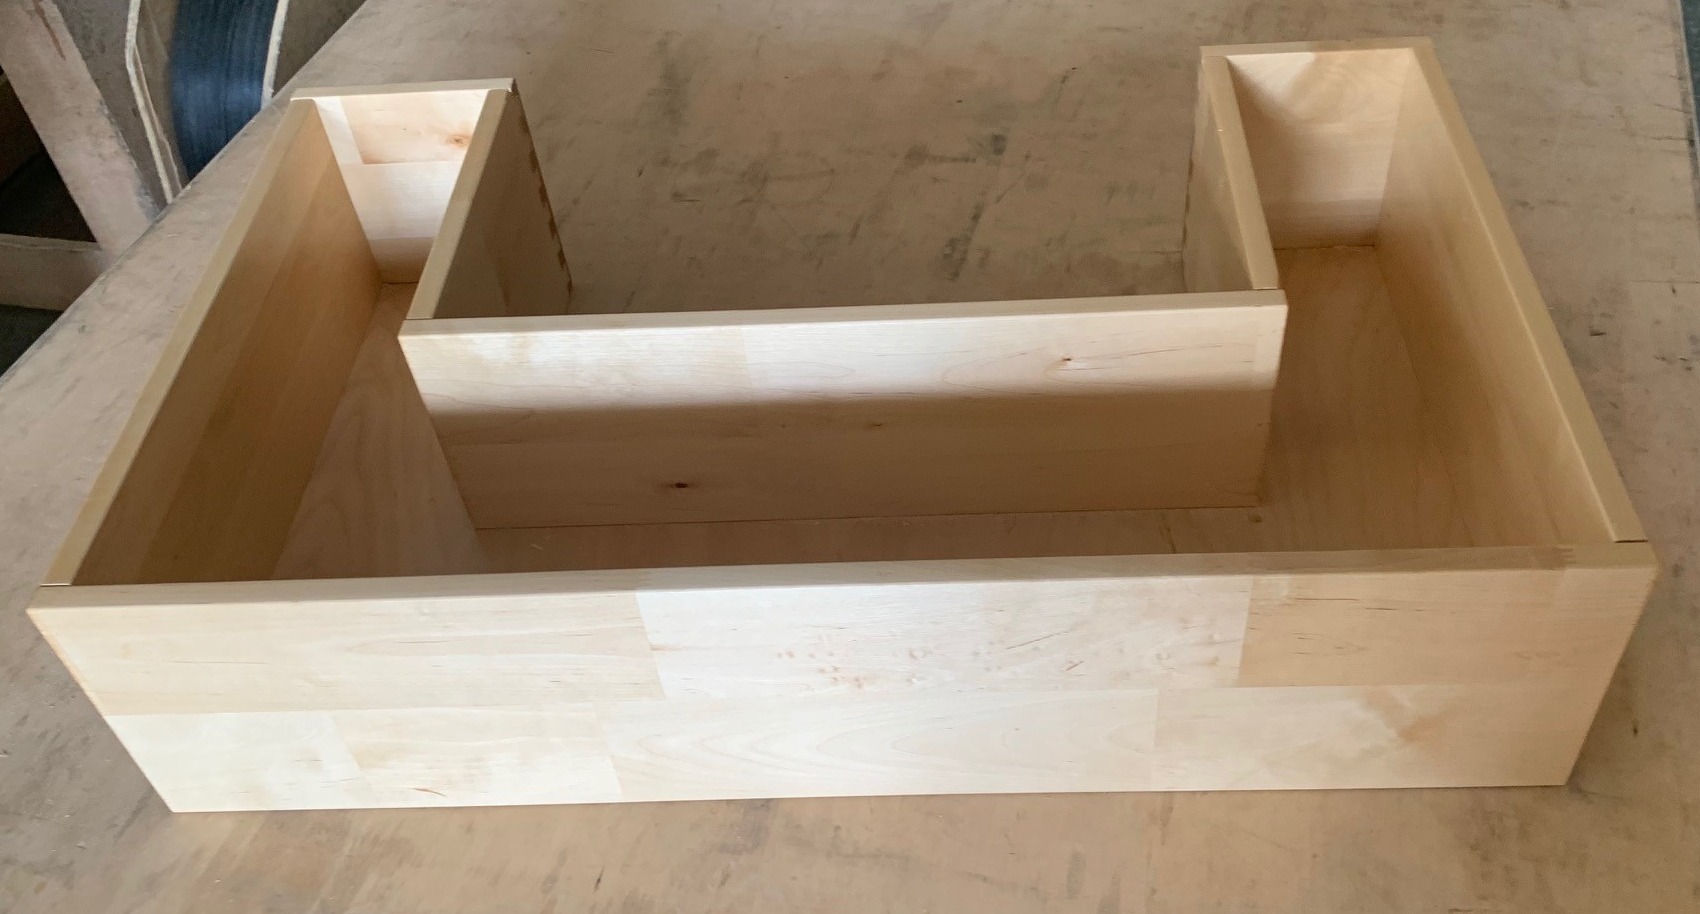 Manufactured by South Florida Dovetailed Drawers - Custom Plumbing Drawers - AddOn